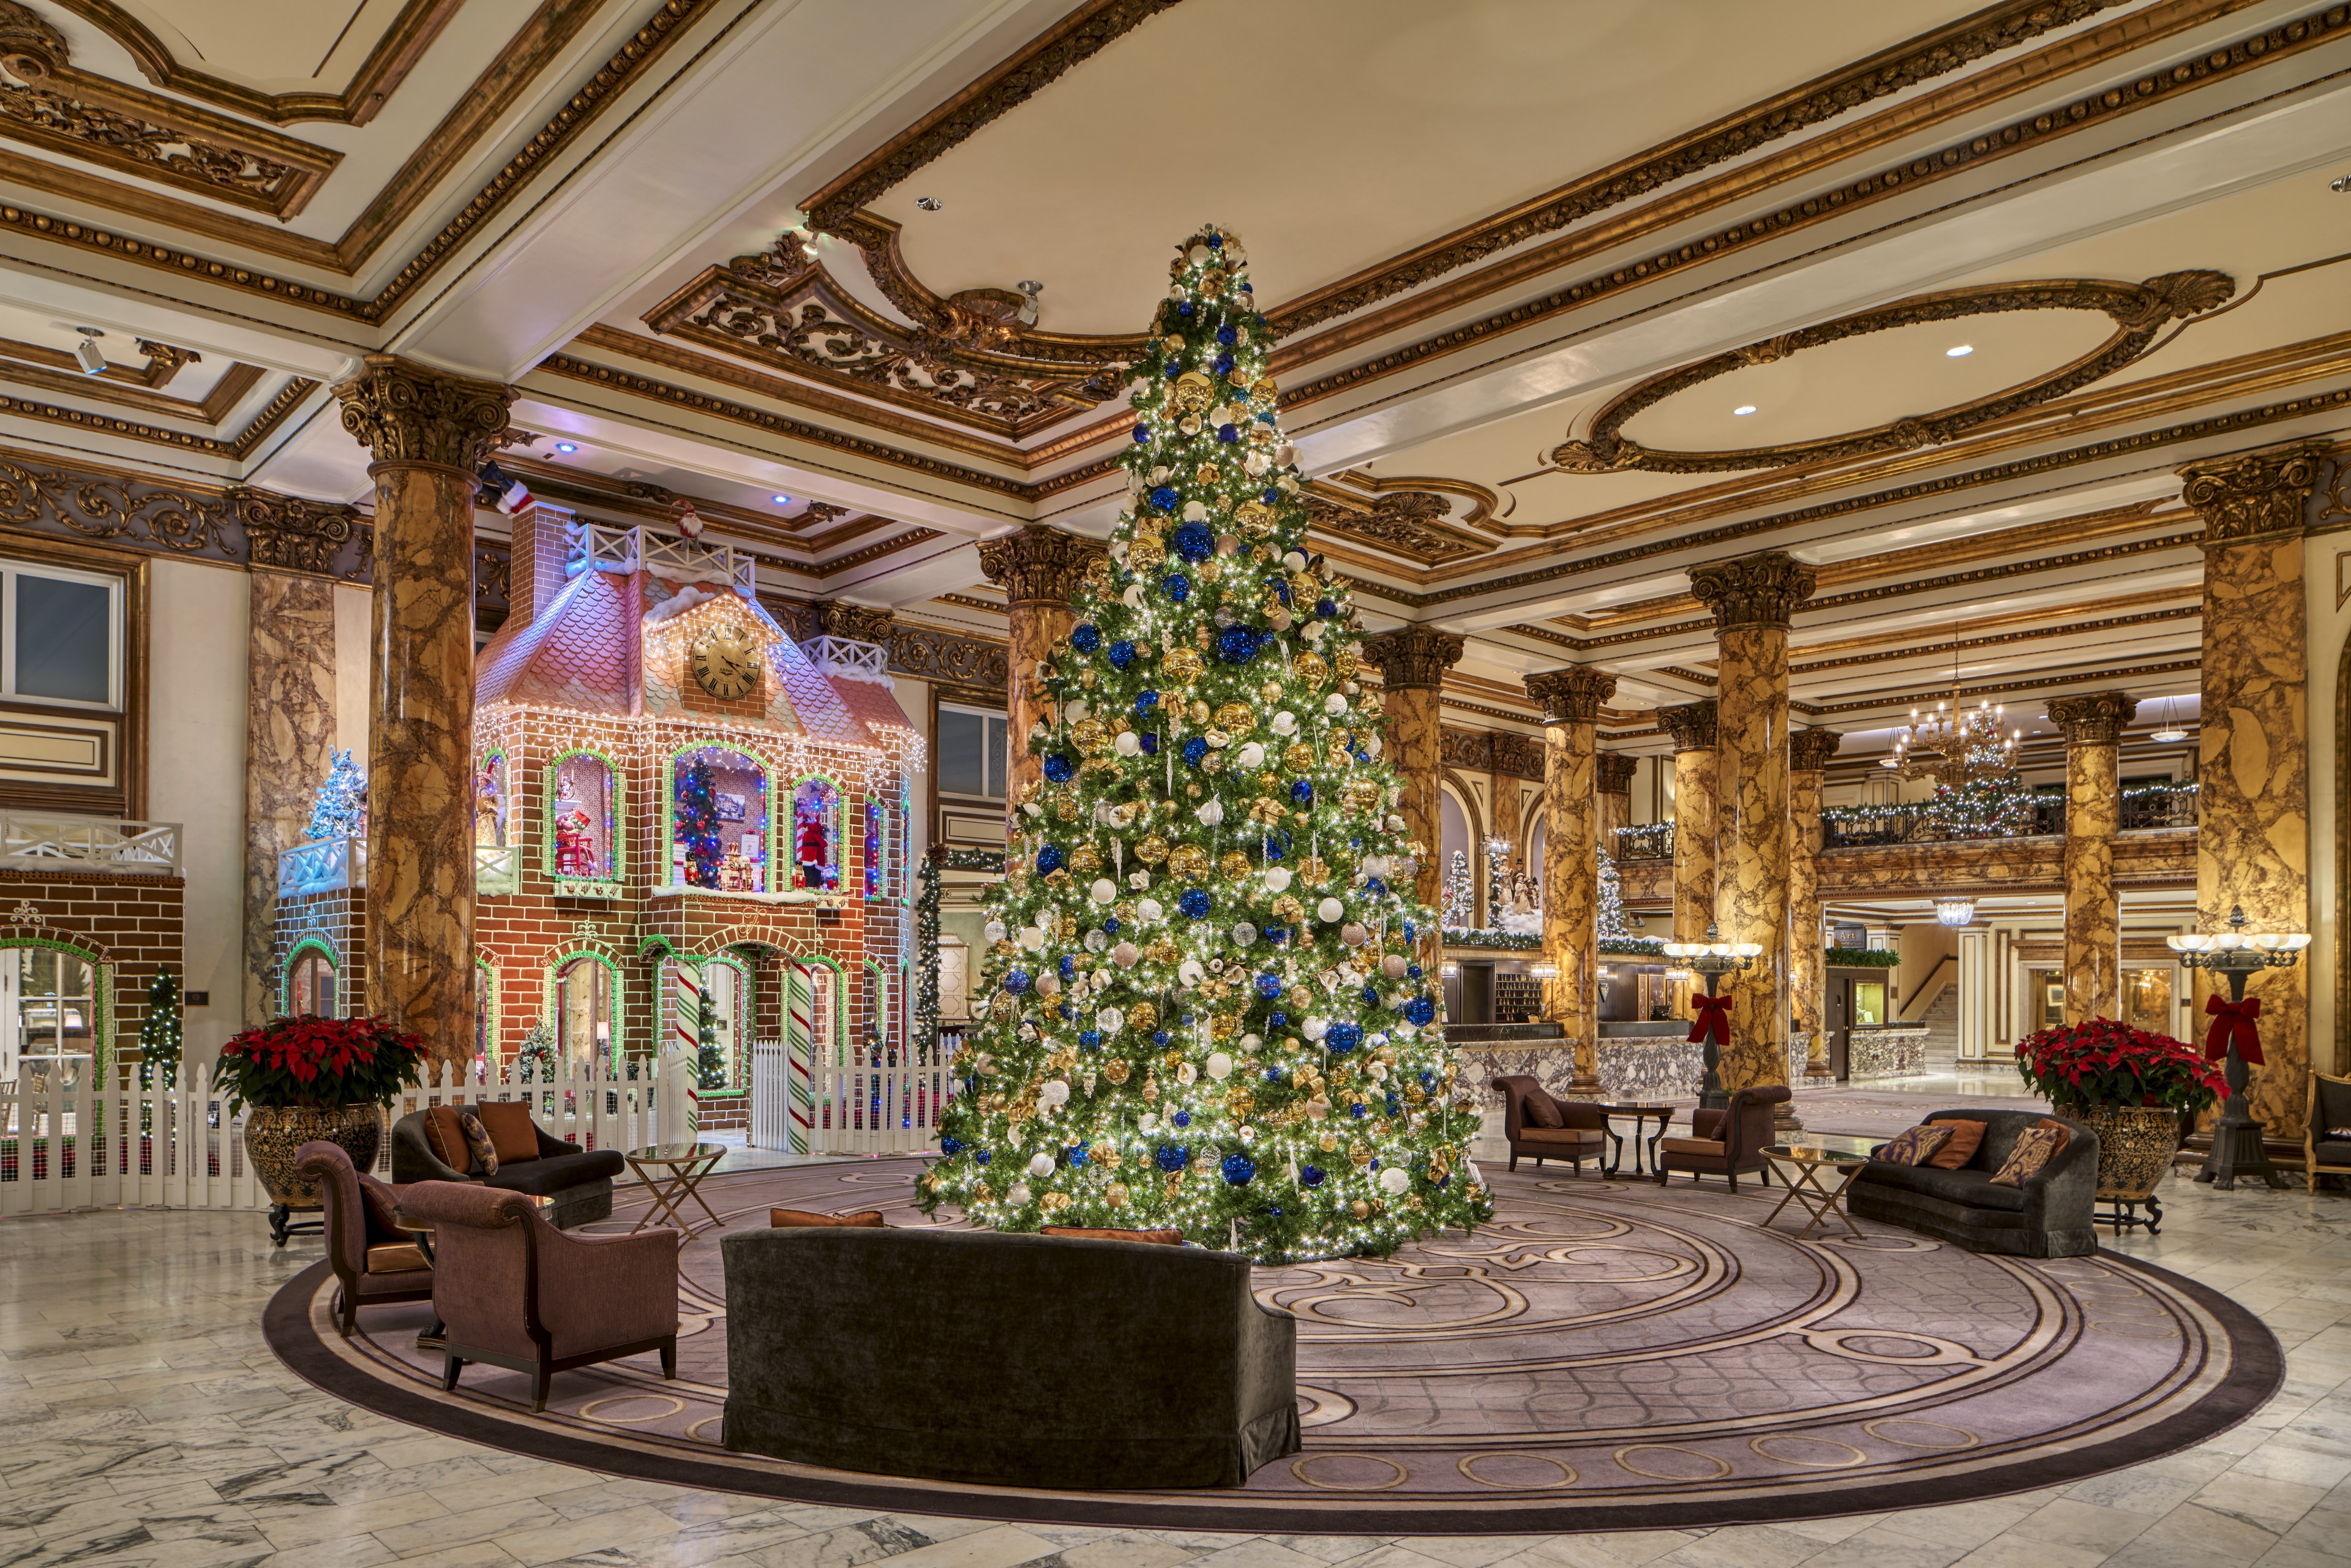 A 23-foot Christmas tree decorated with blue and gold ornaments, twinkly lights and icicles stands tall in the middle of the Fairmont hotel's elegant lobby, which also houses a life-size gingerbread house decorated with gingerbread bricks and See's Candies.  